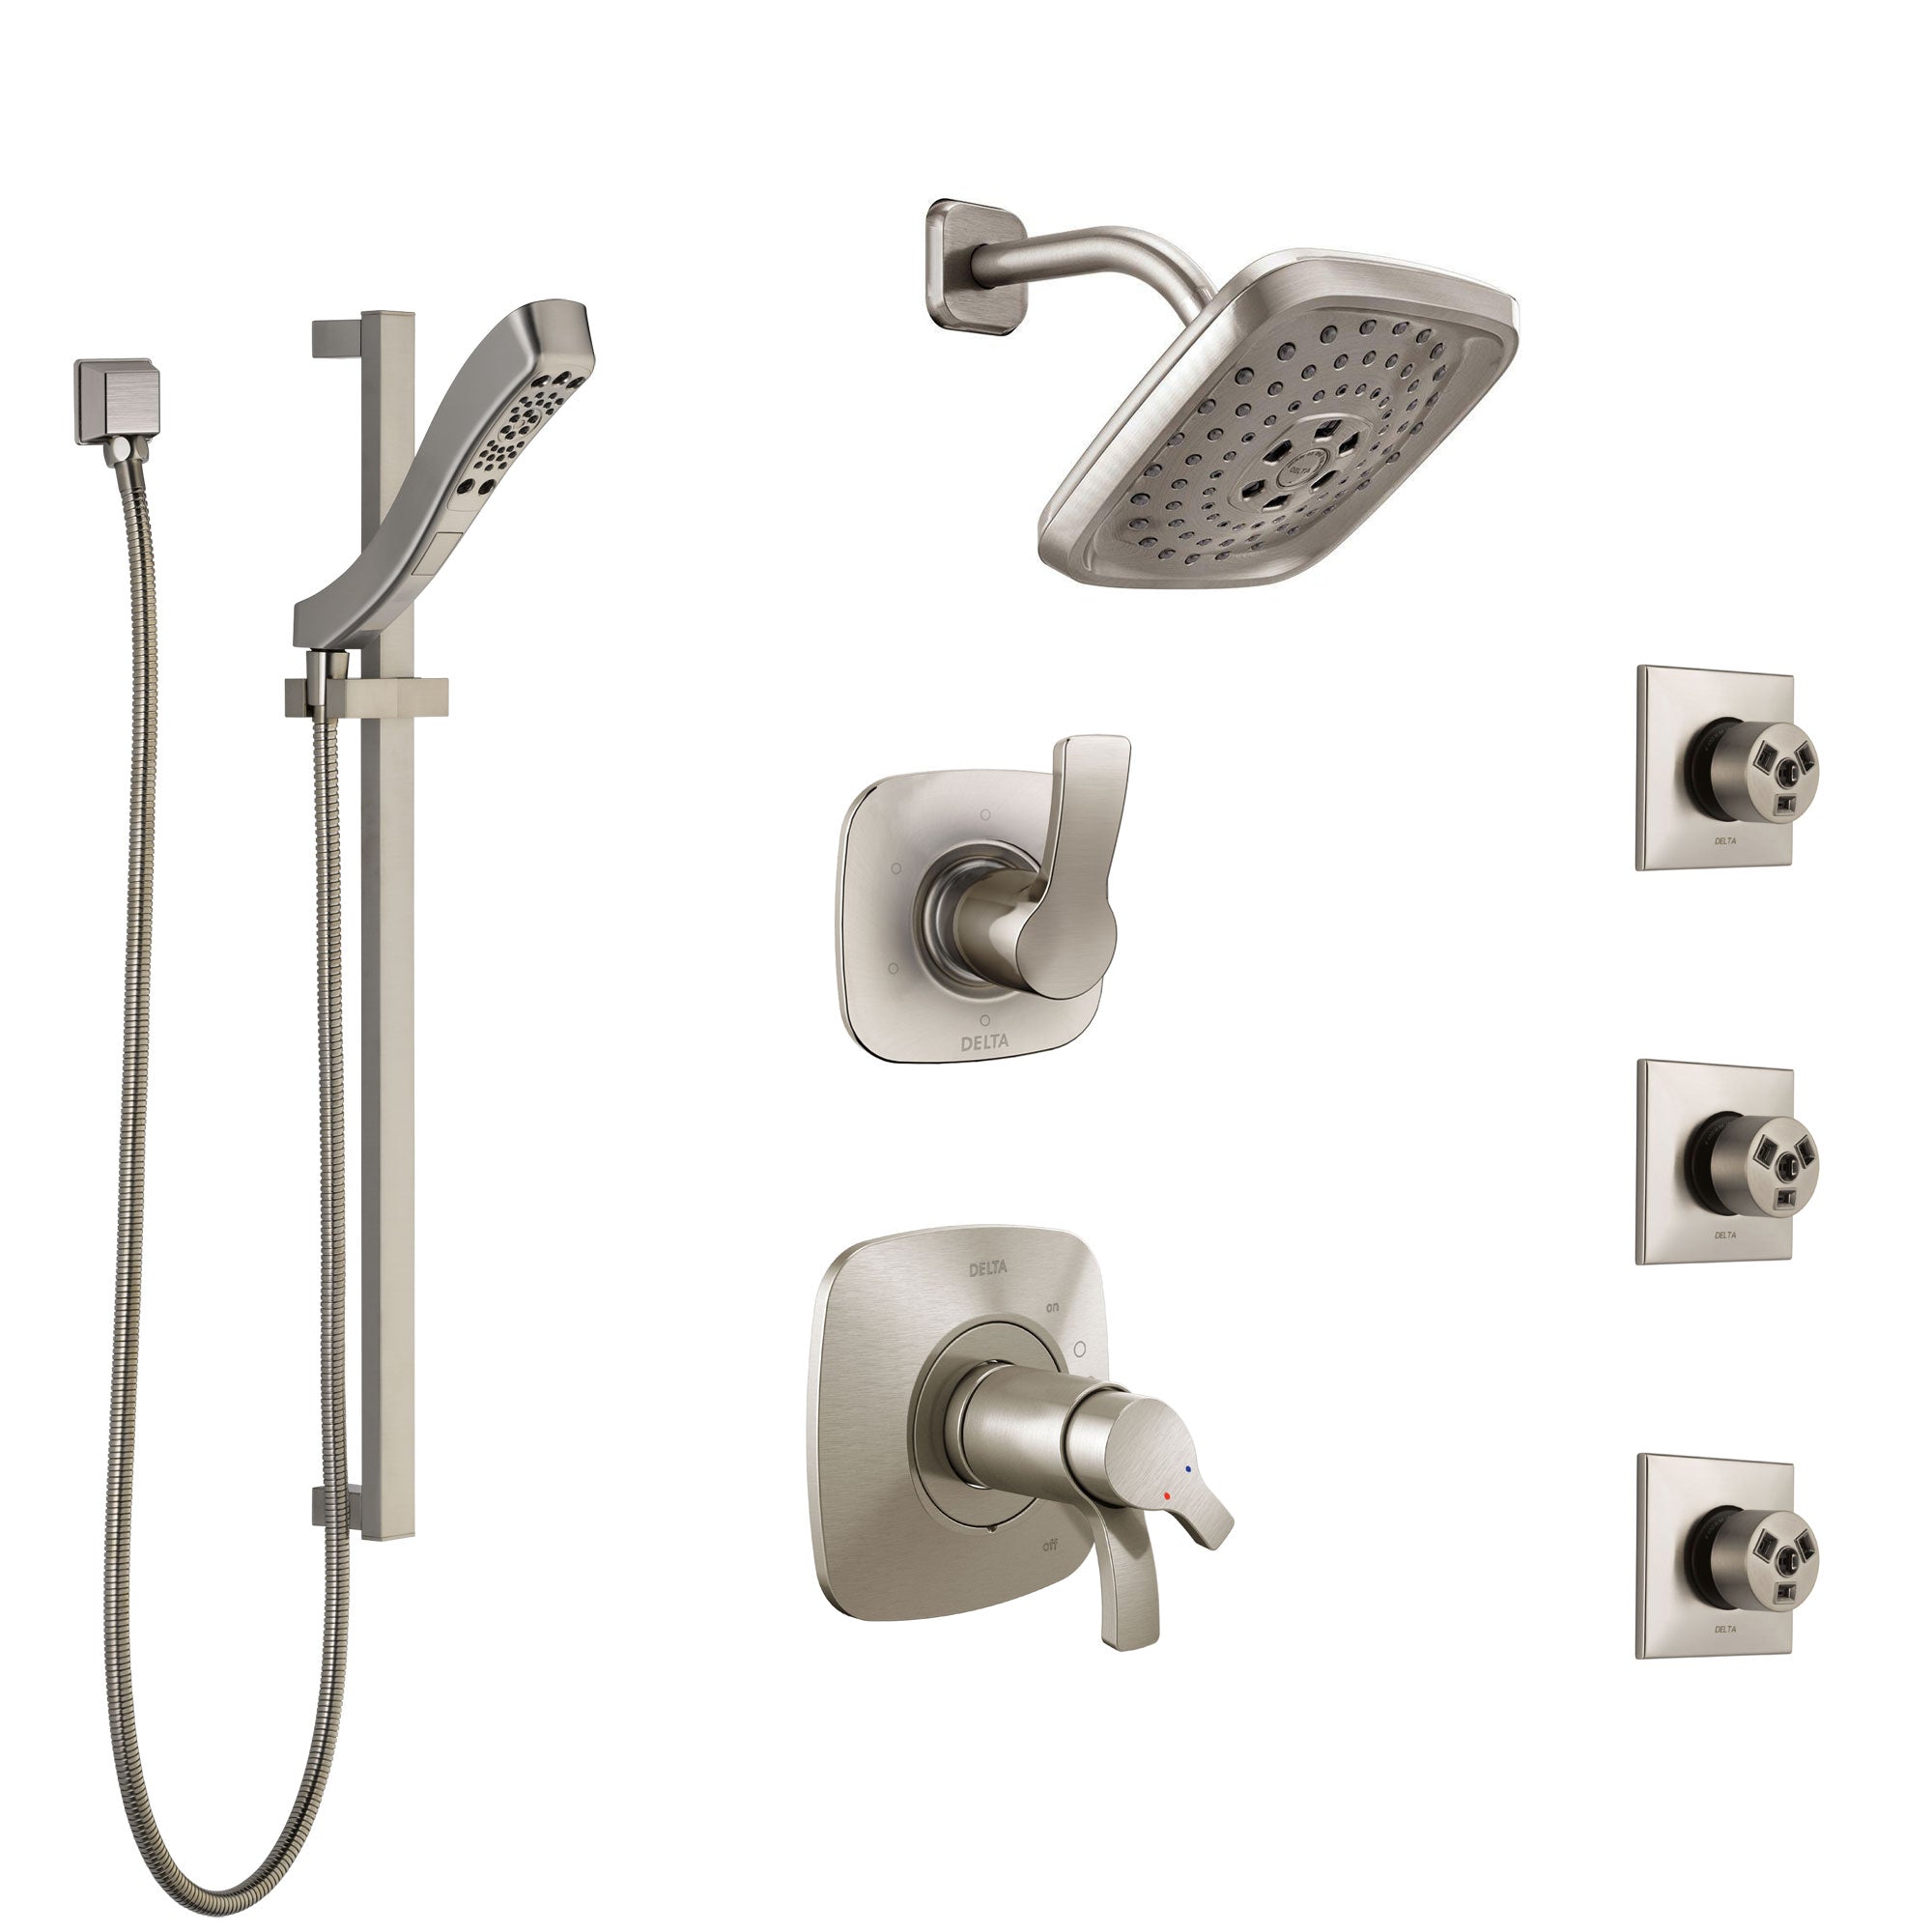 Delta Tesla Dual Thermostatic Control Stainless Steel Finish Shower System, Diverter, Showerhead, 3 Body Sprays, and Hand Shower SS17T2521SS4